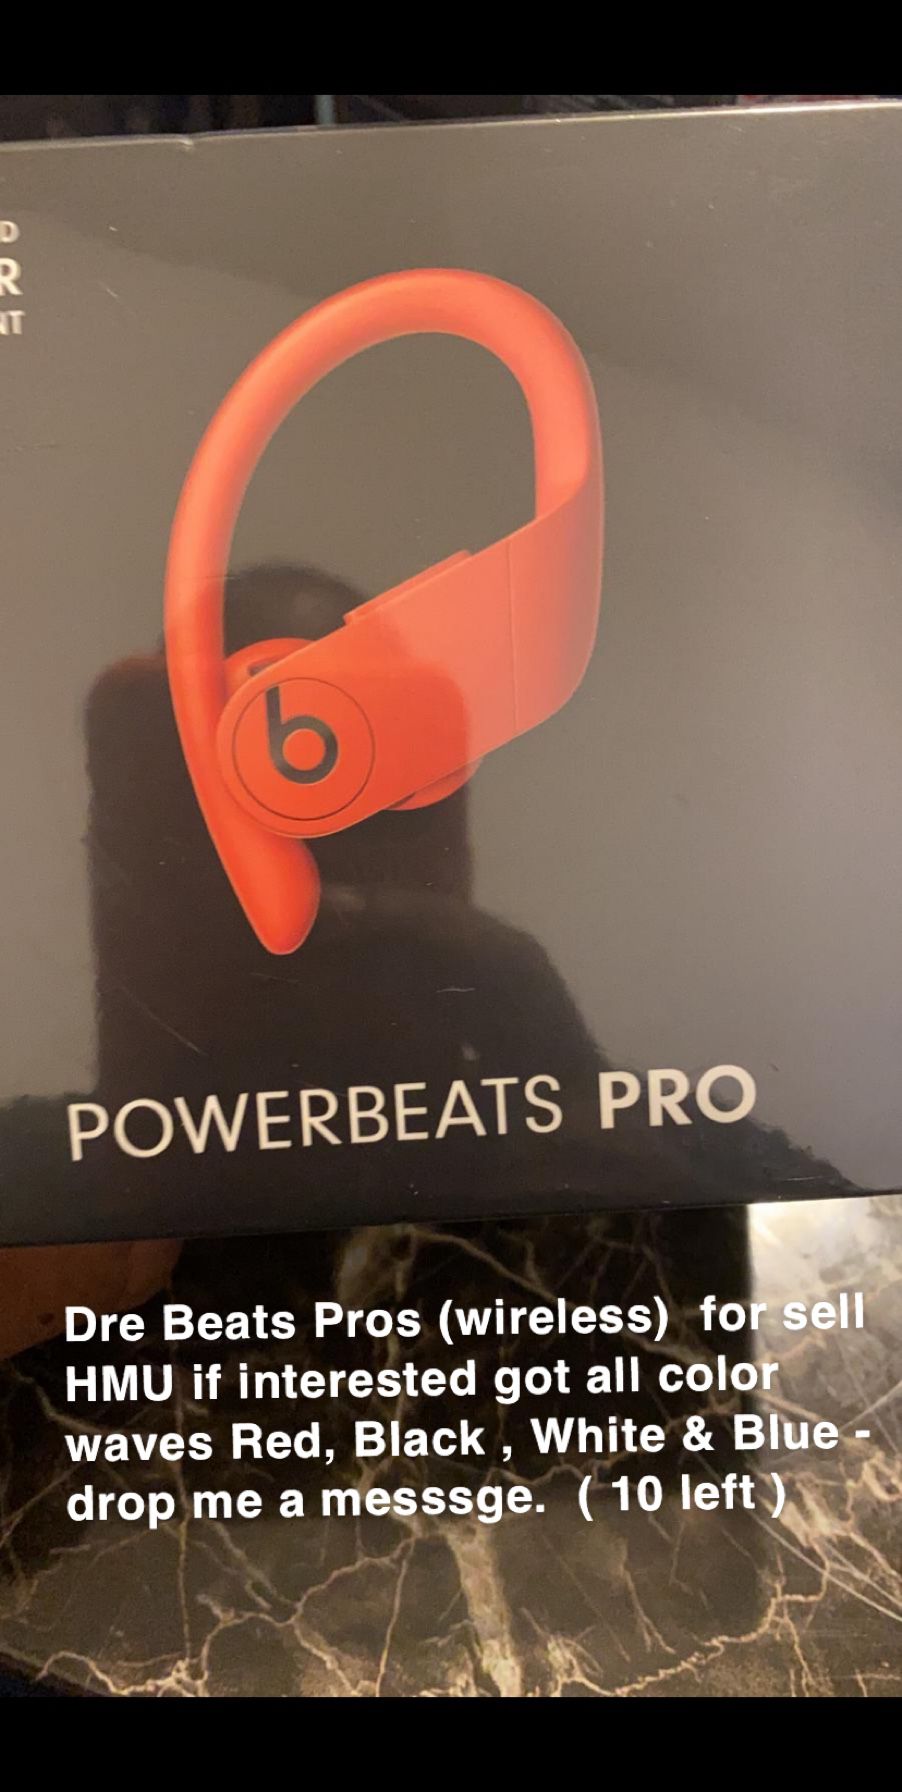 Dre Beats pros , wireless , devices , electronically